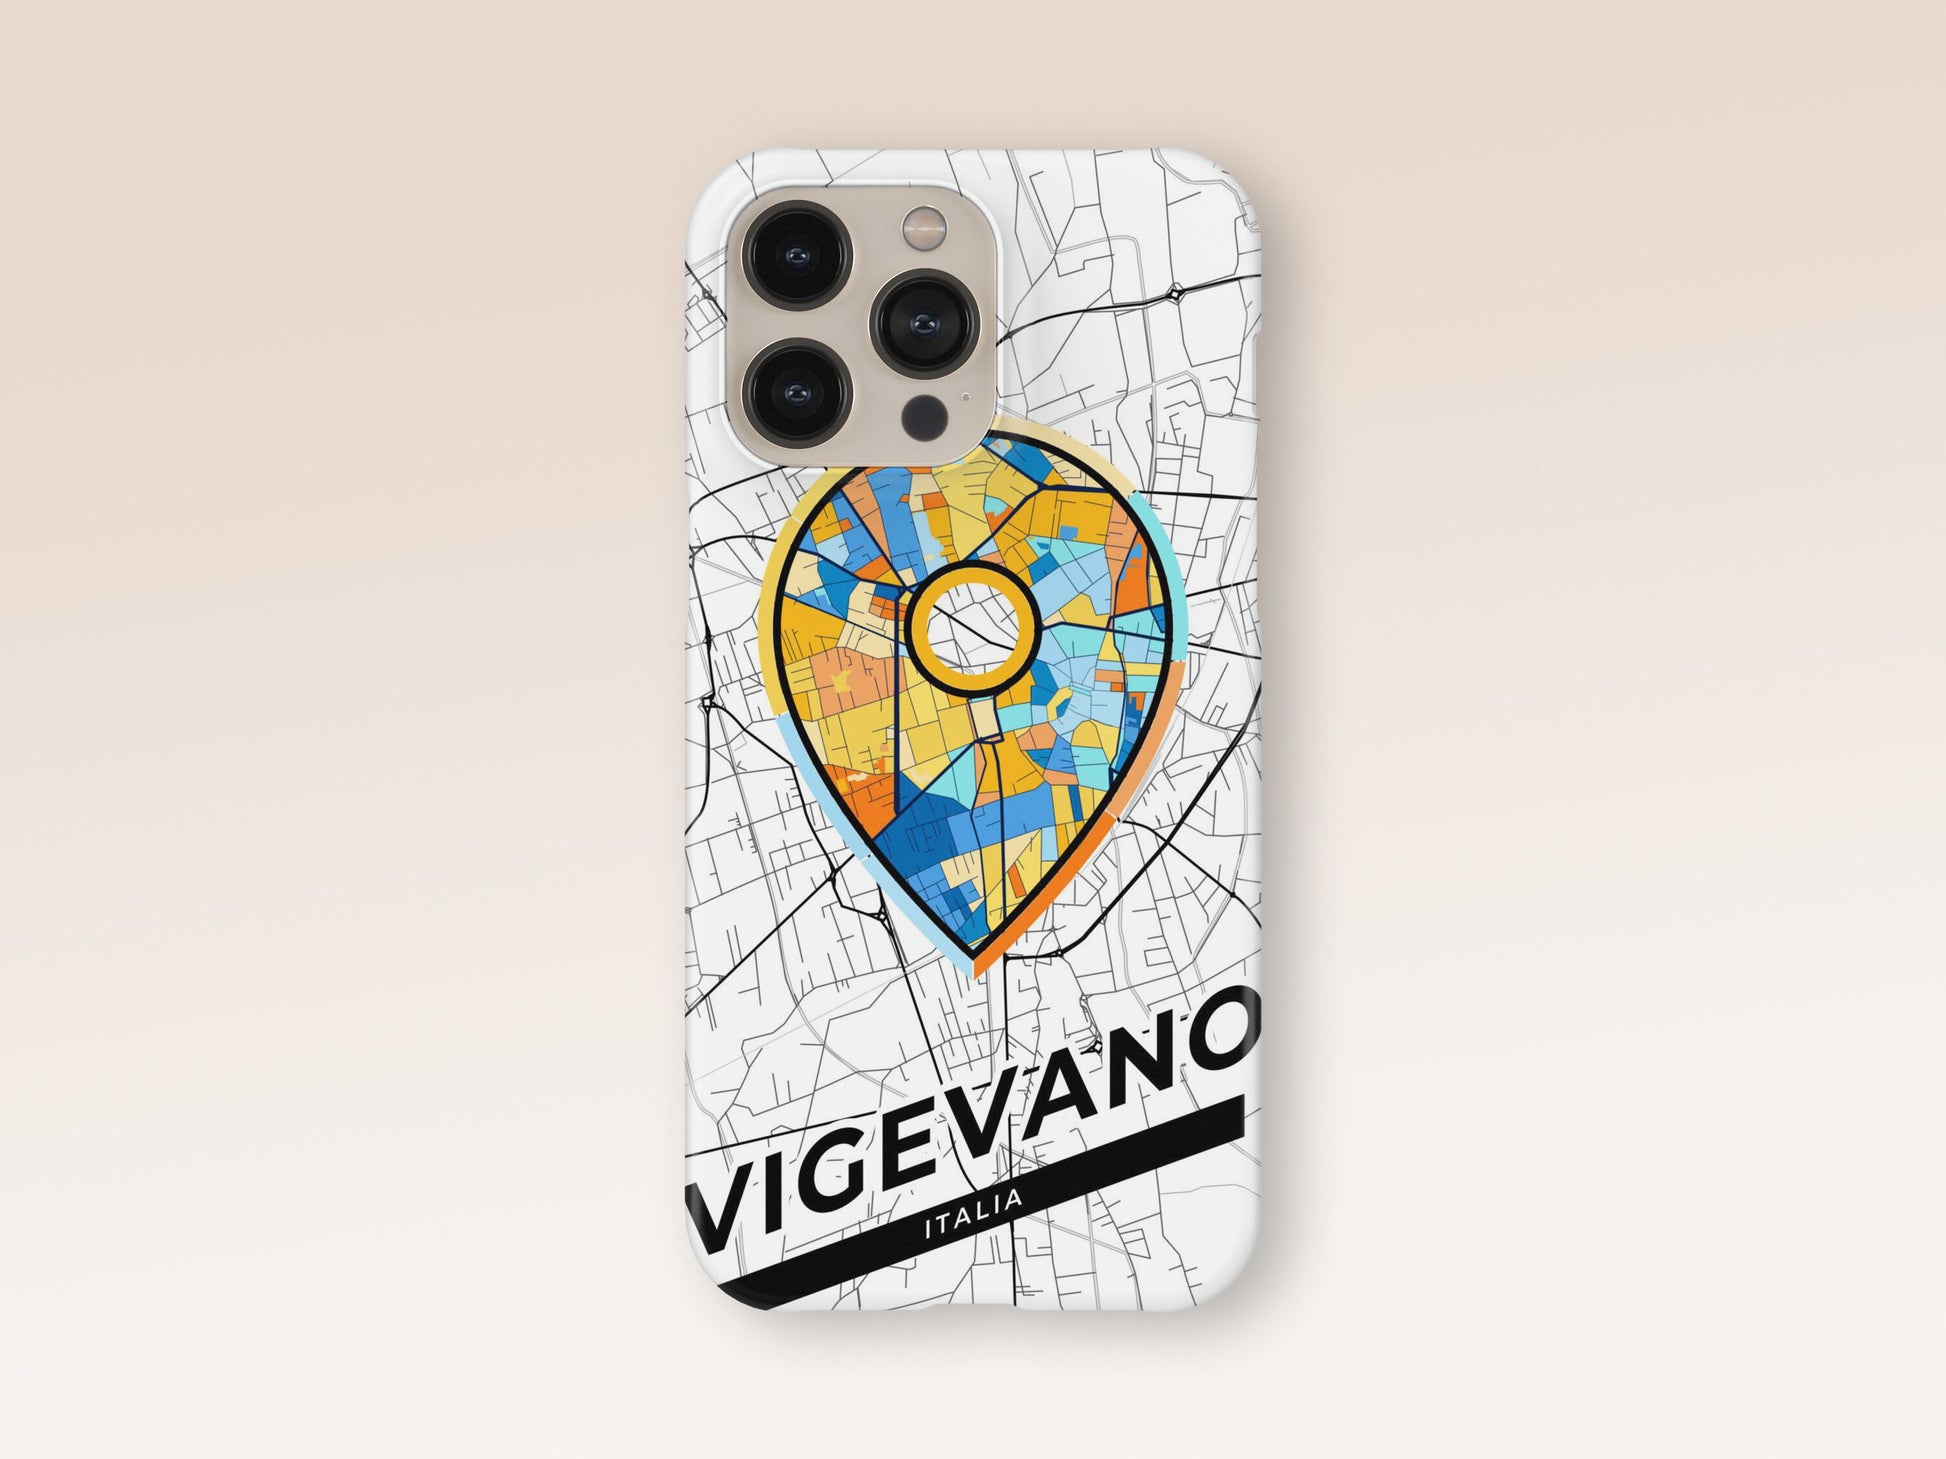 Vigevano Italy slim phone case with colorful icon 1